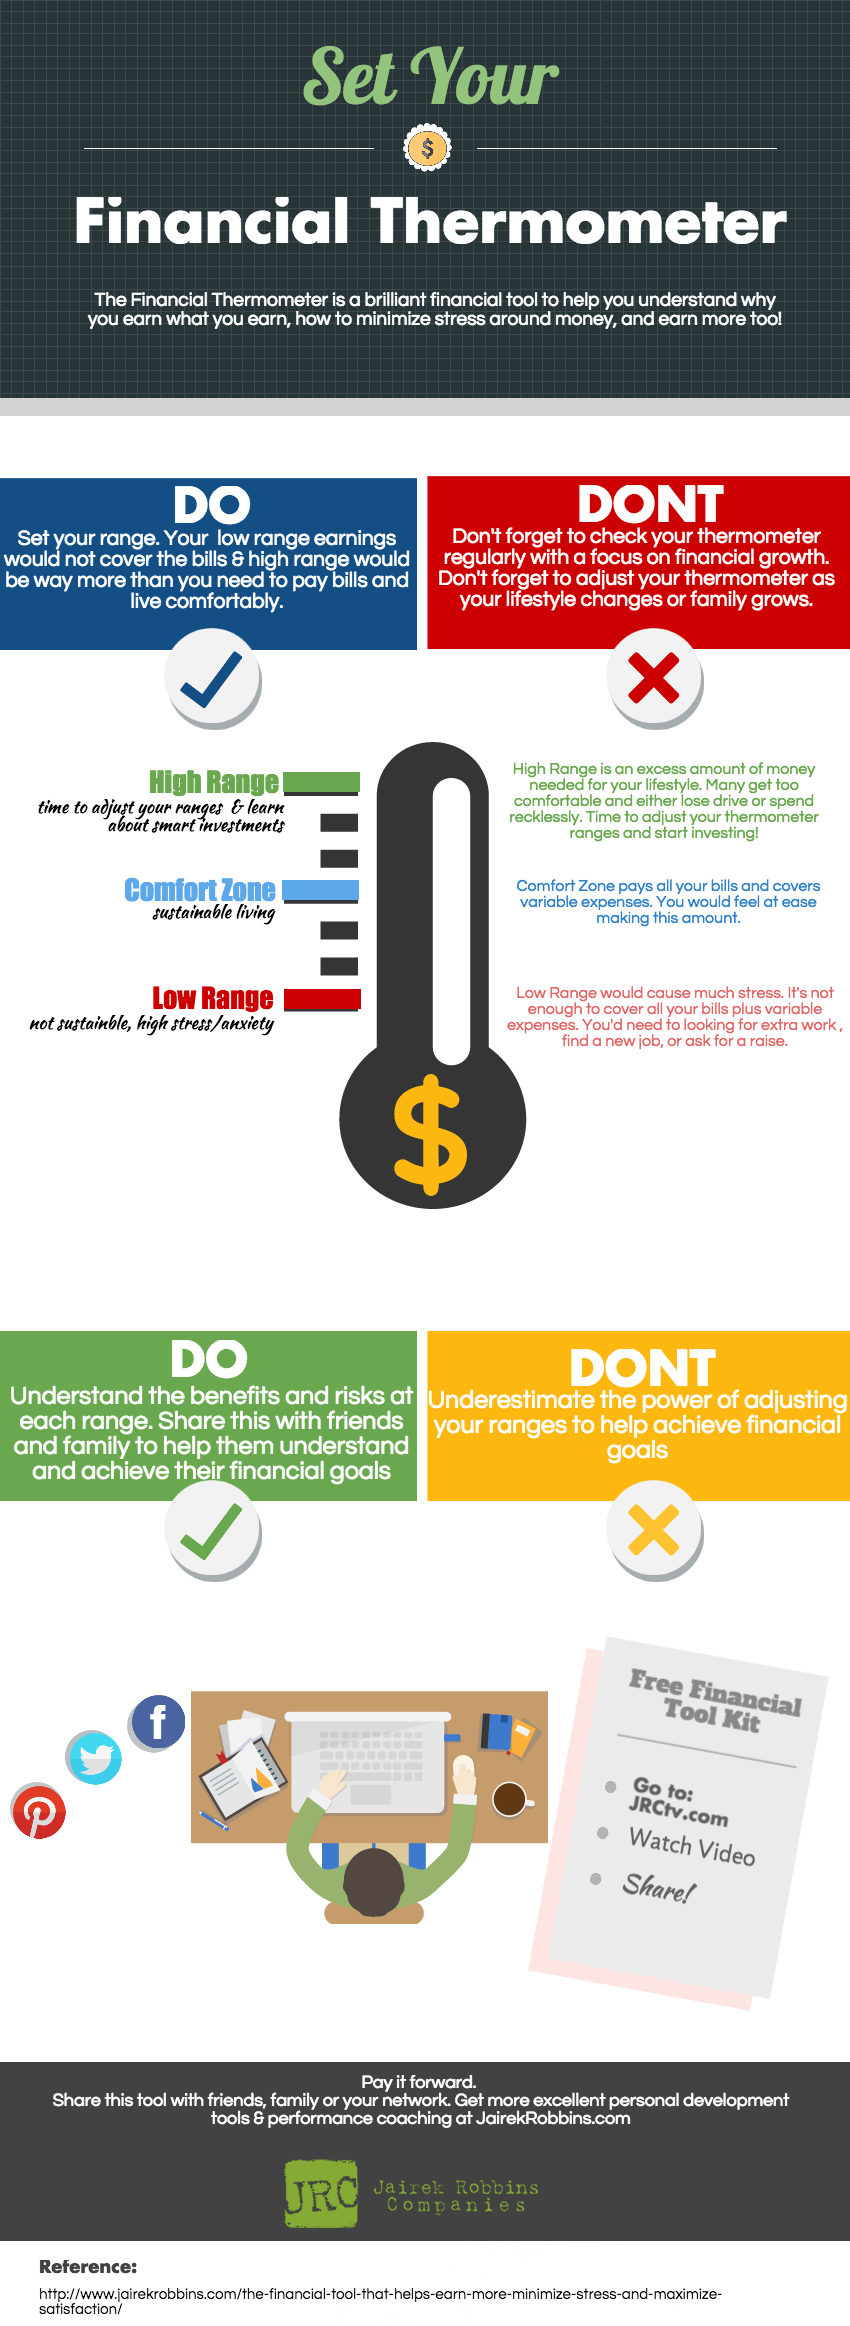 Financial Thermometer financial tool to help you earn more money and reduce stress financial planning tool infographic